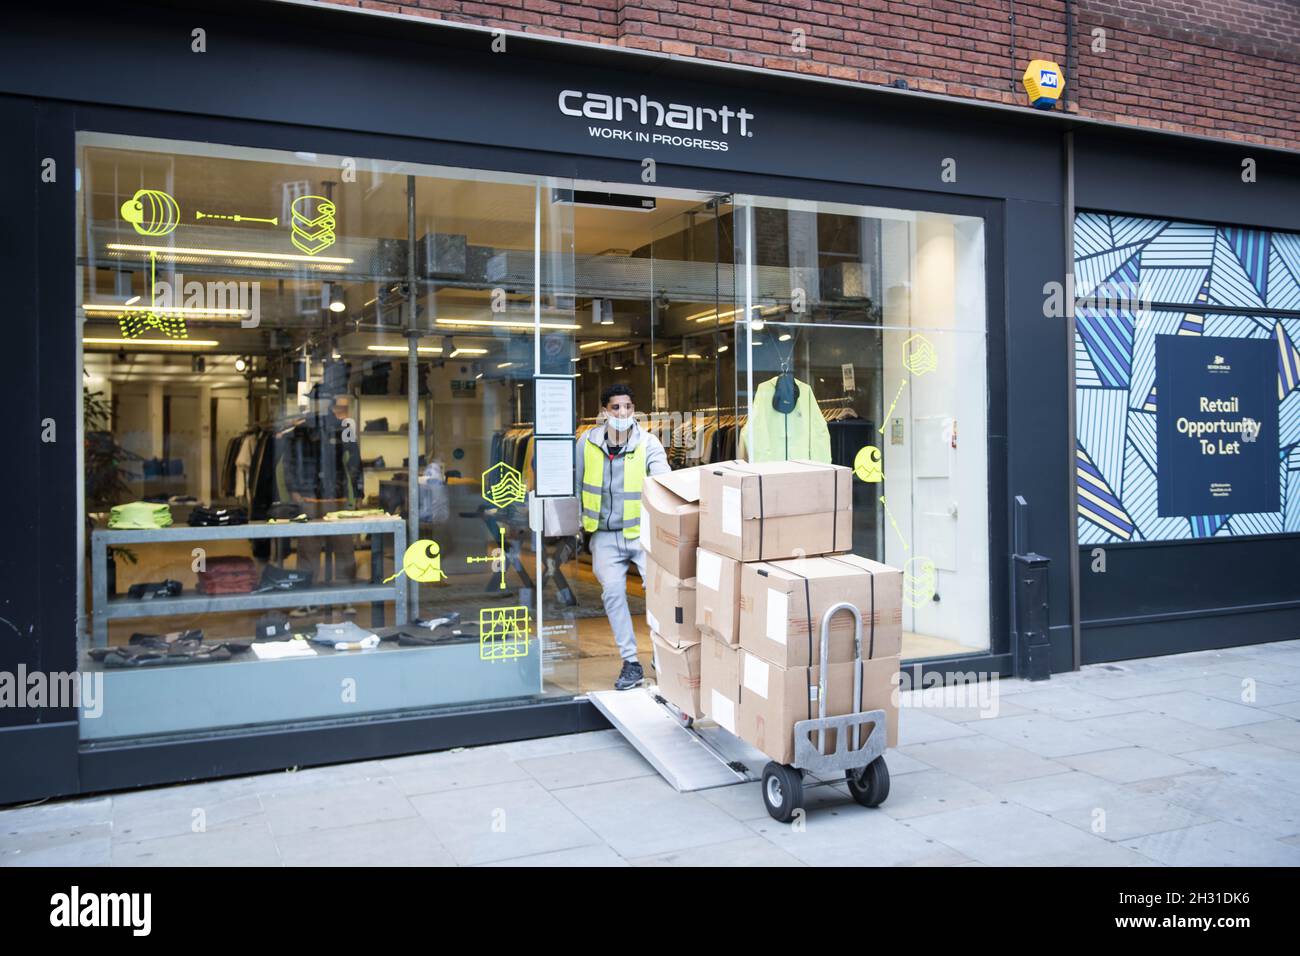 A delivery driver delivers boxes of stock to a Carhartt store in Covent Garden, London in preparation to reopen following the introduction of measures to bring England out of lockdown. Picture date: Friday 12th June 2020. Photo credit should read: David Jensen/EMPICS Entertainment Stock Photo